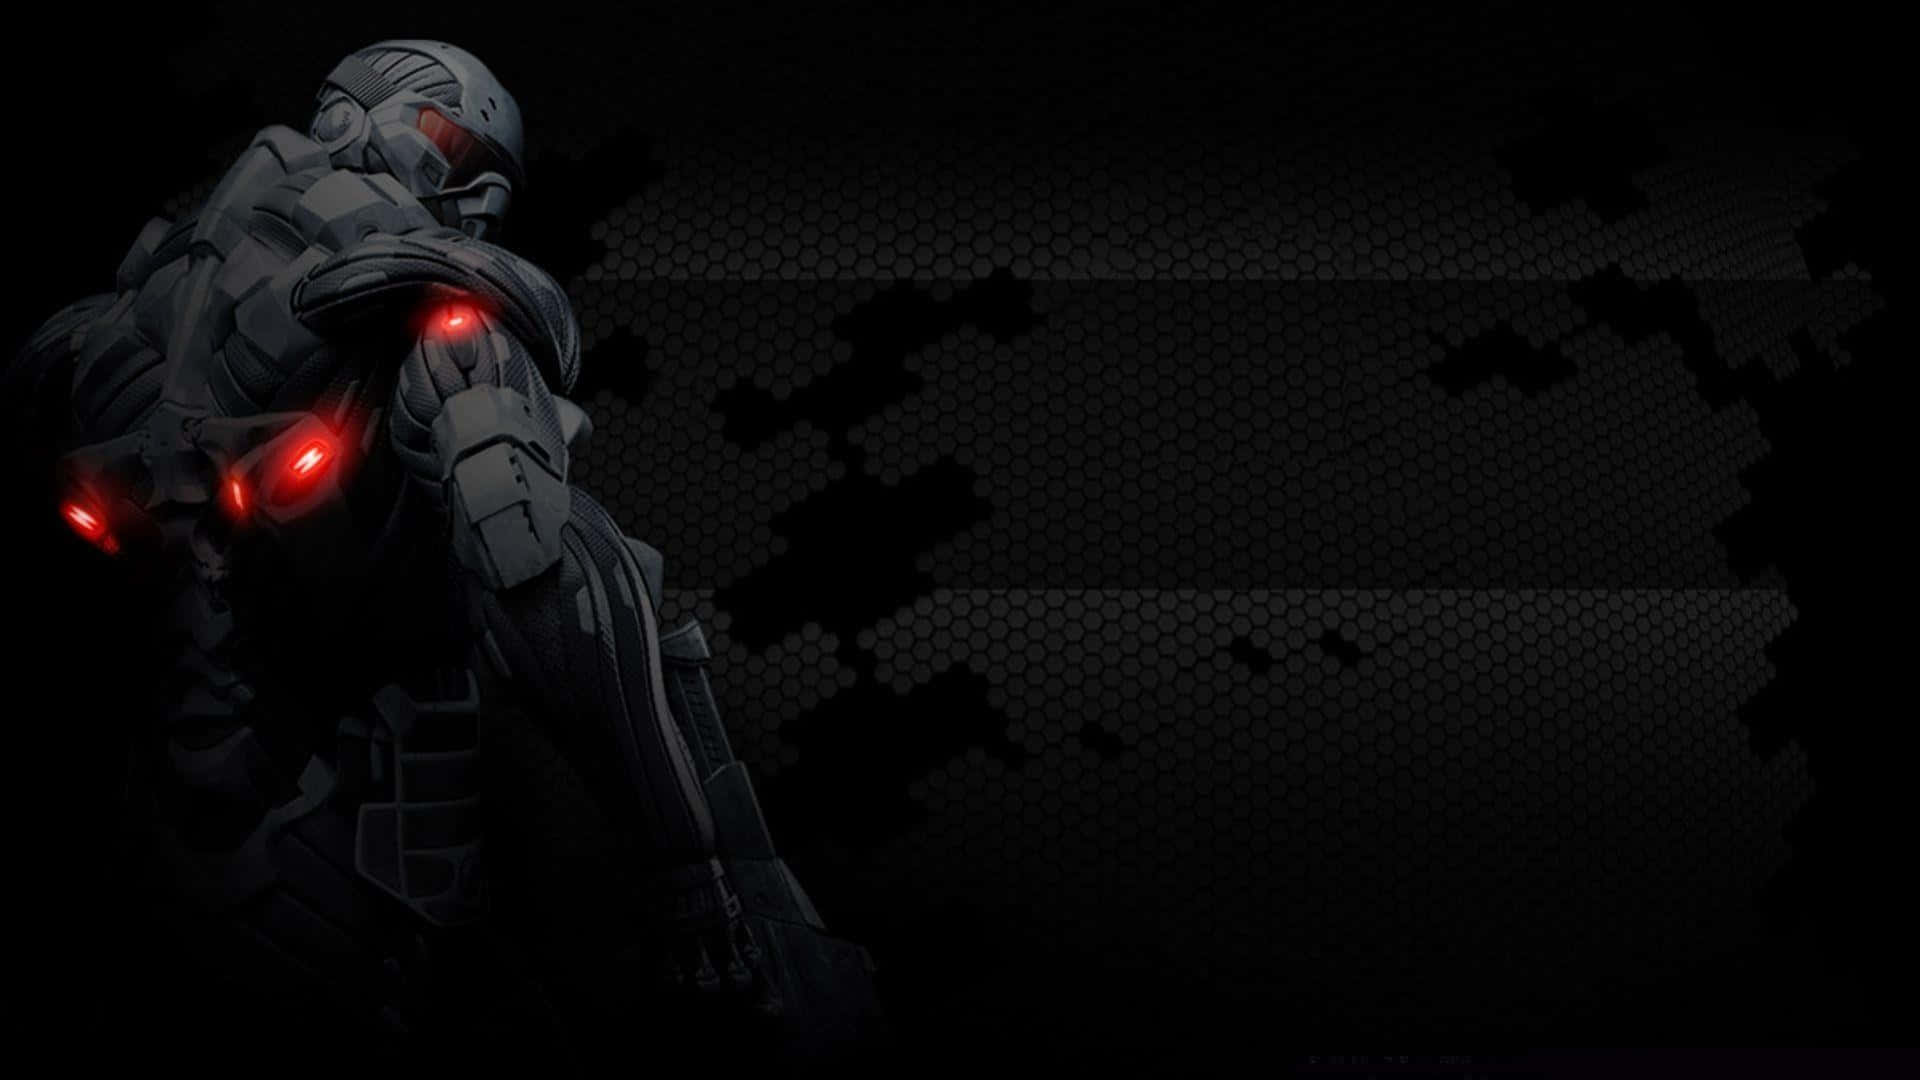 A Soldier Faces a Cybernetic Enemy in Crysis Wallpaper